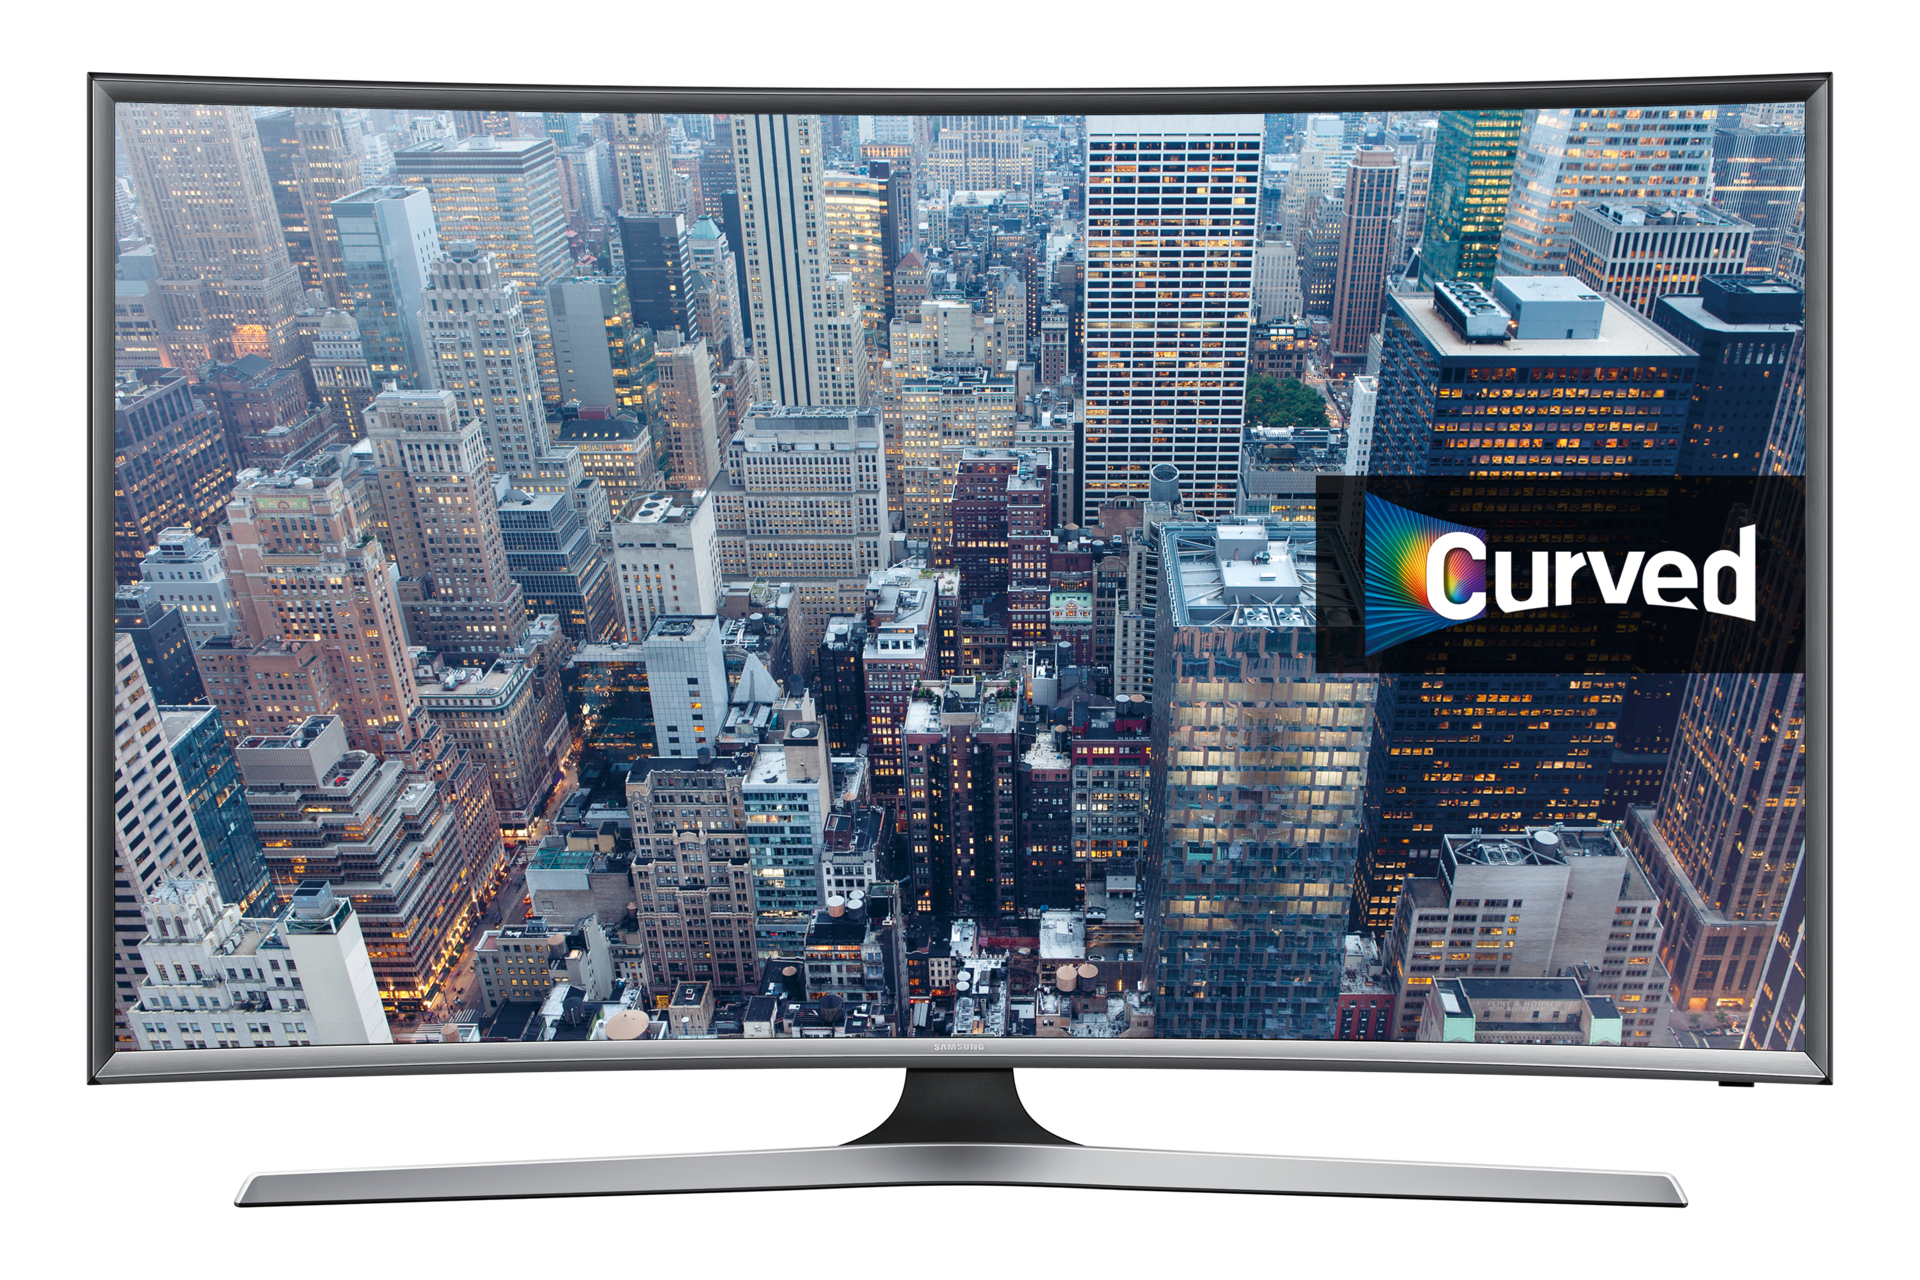 40" J6300 6 Series Curved Full HD LED TV | Support UK